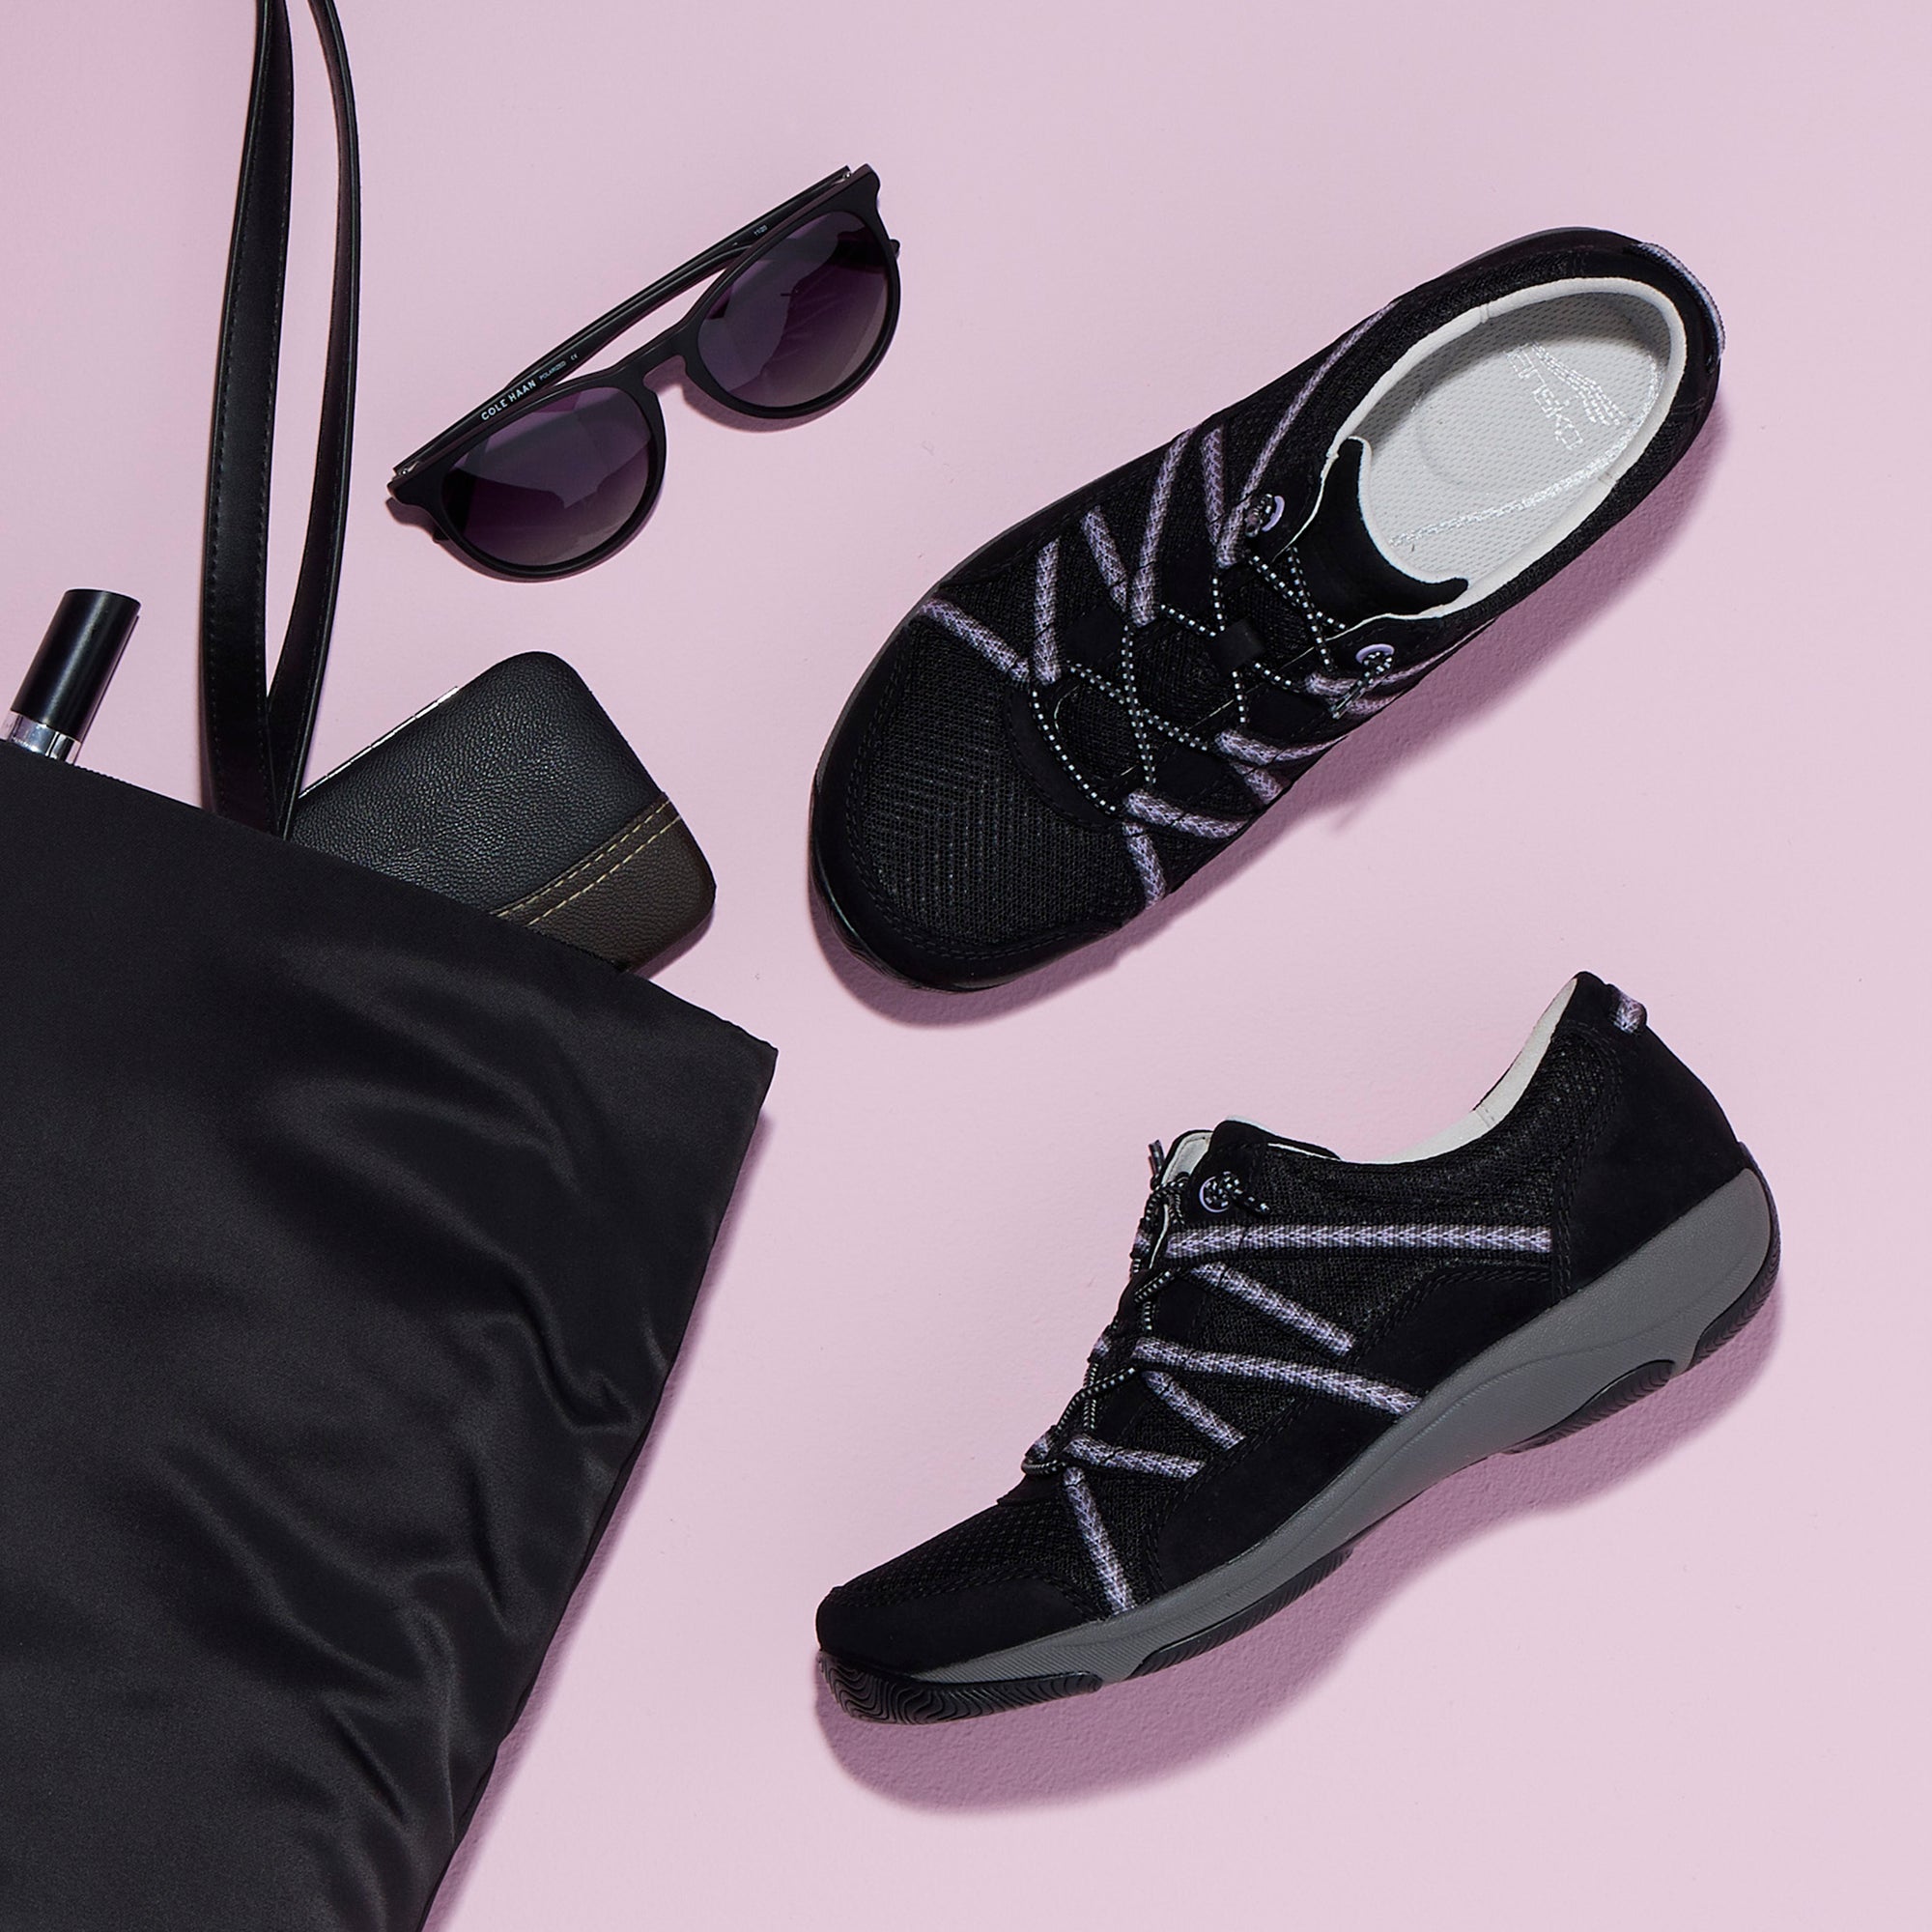 A black sneaker shown with a travel bag to say it is lightweight and great for travel.